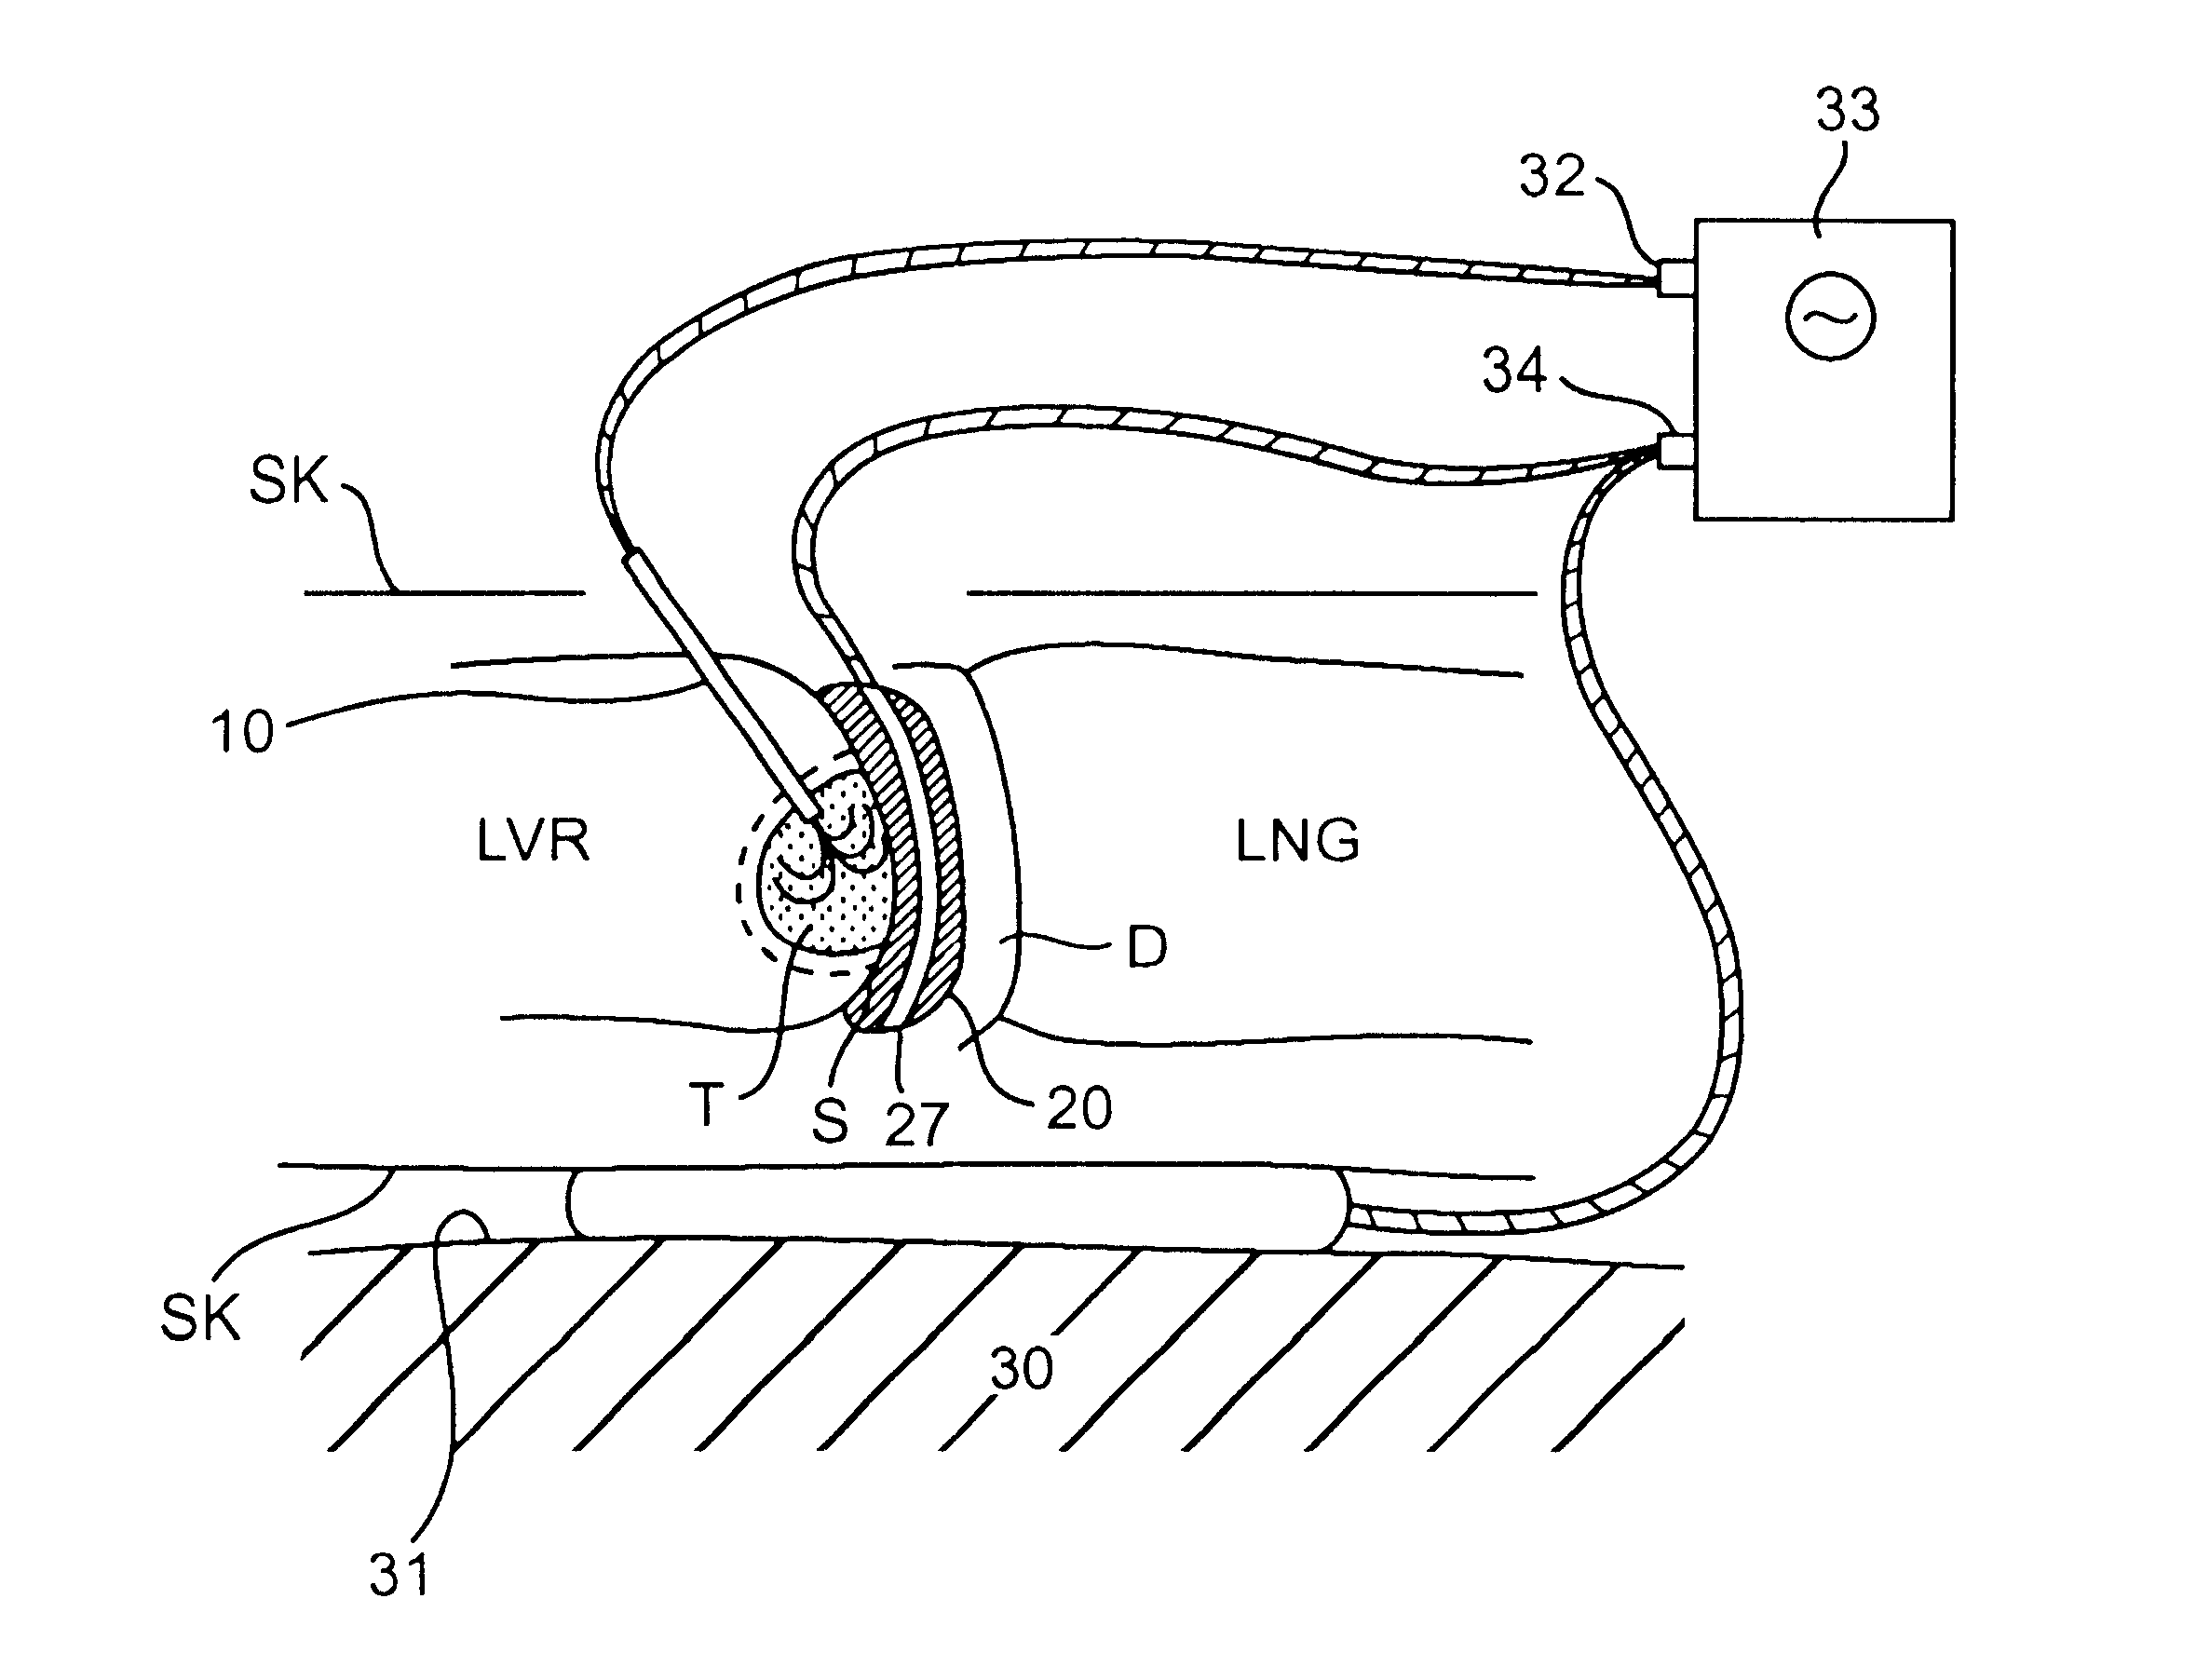 Apparatus and method for shielding tissue during tumor ablation